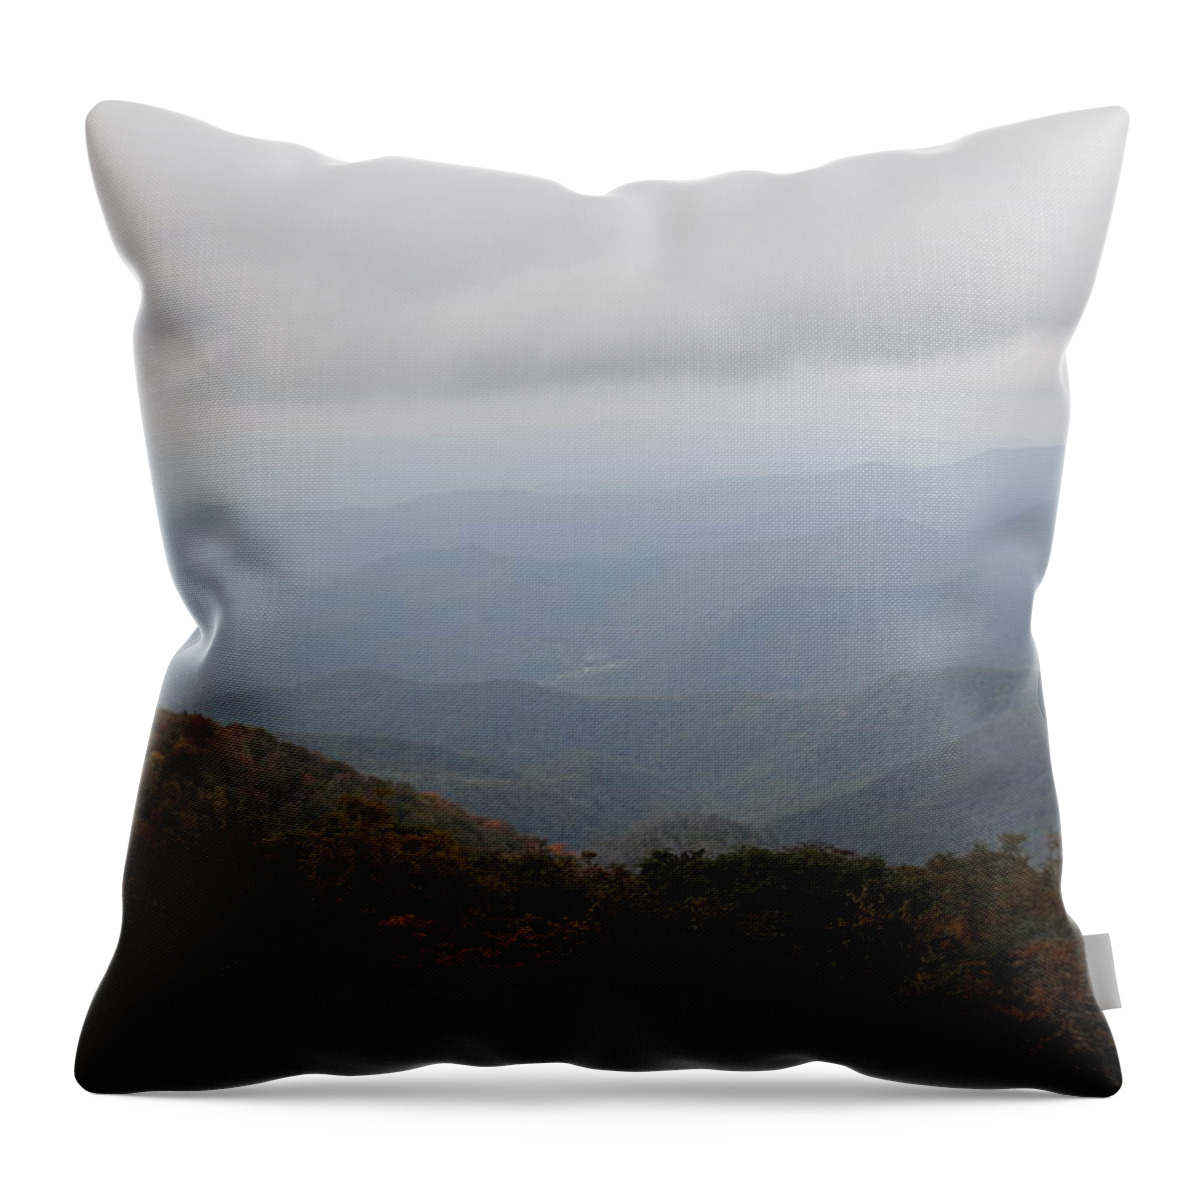 Misty Mountains Throw Pillow featuring the photograph Misty Mountains More by Allen Nice-Webb